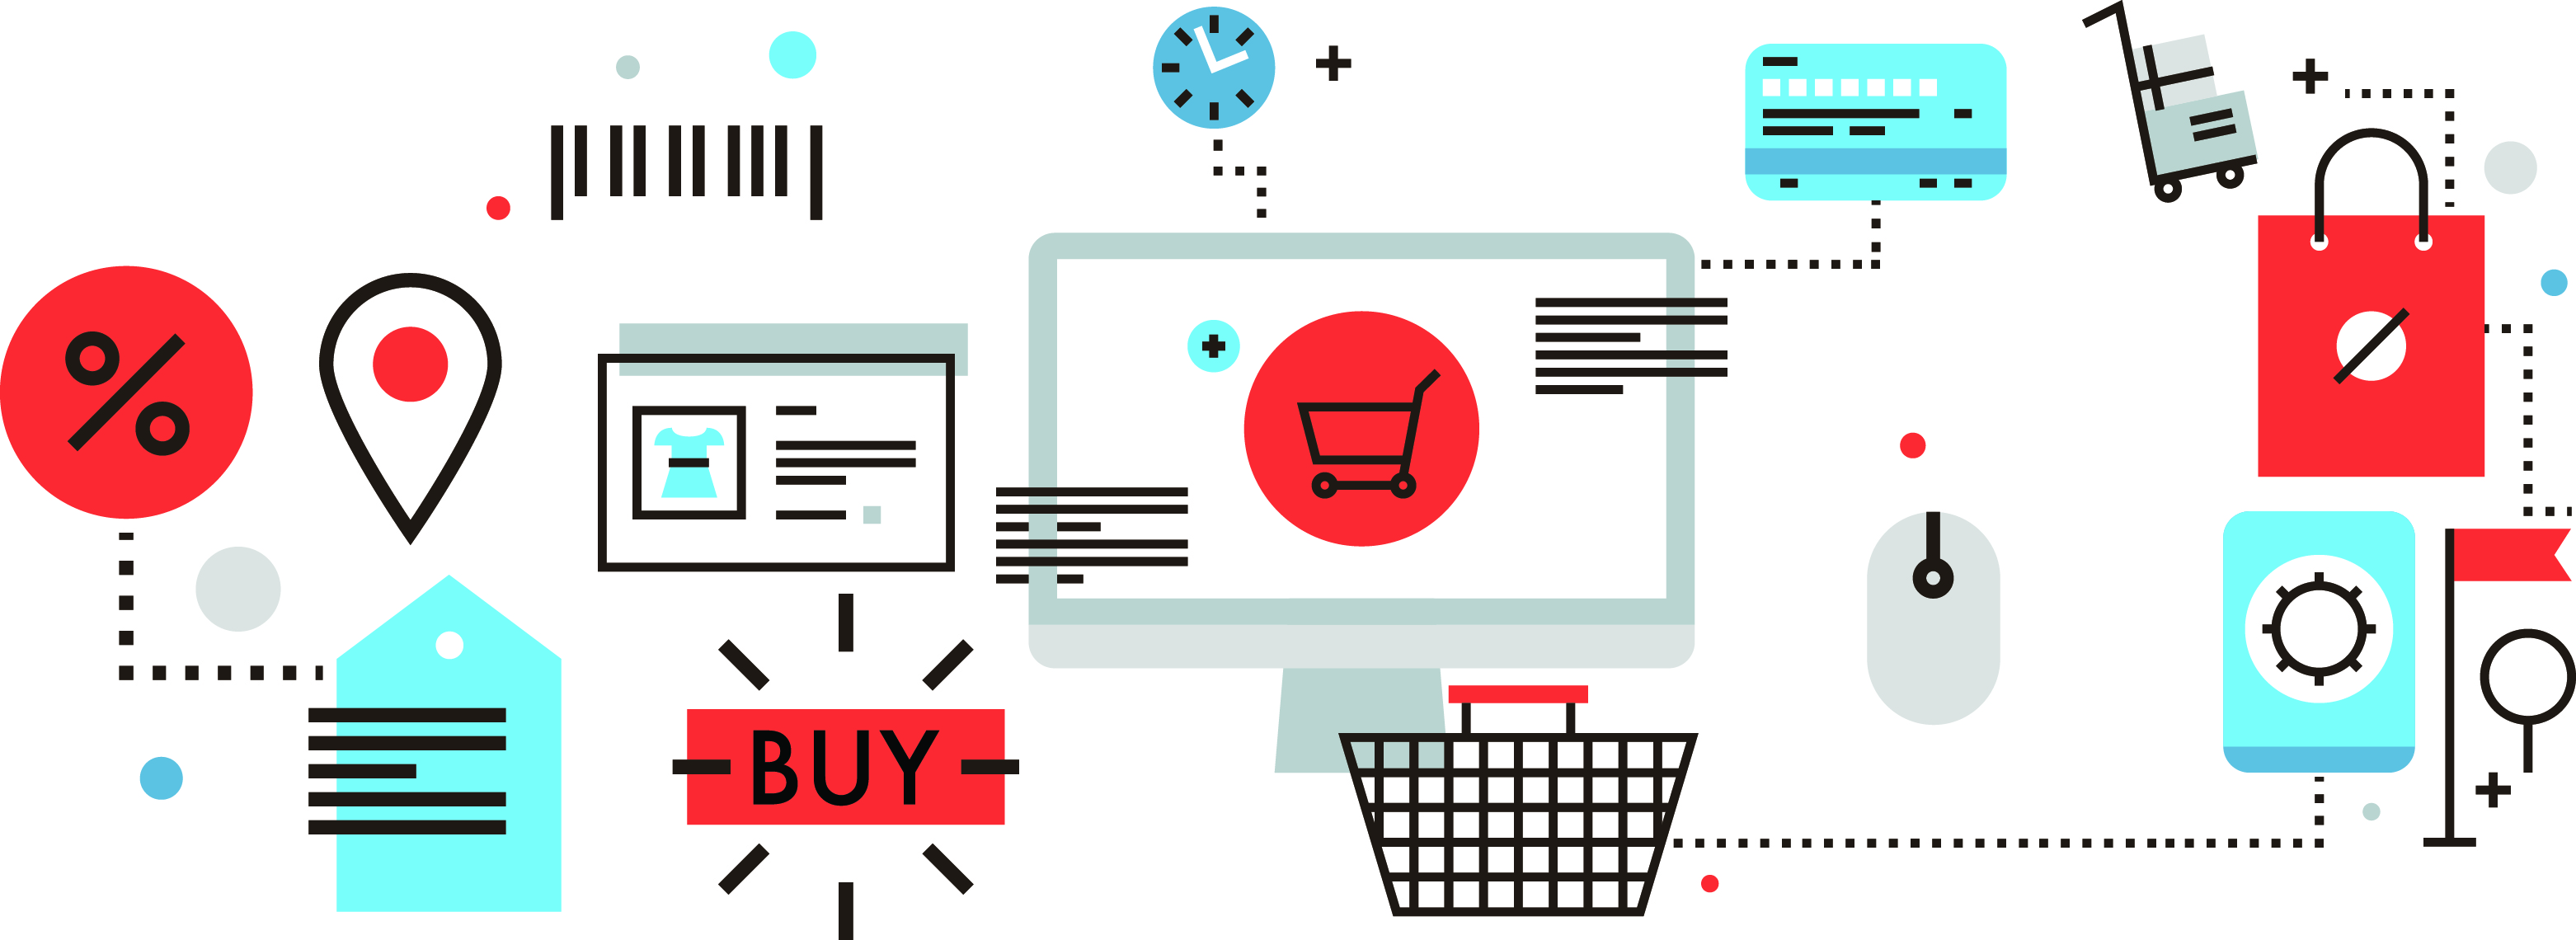 eCommerce trends to look out for in 2018 - ClusterCS